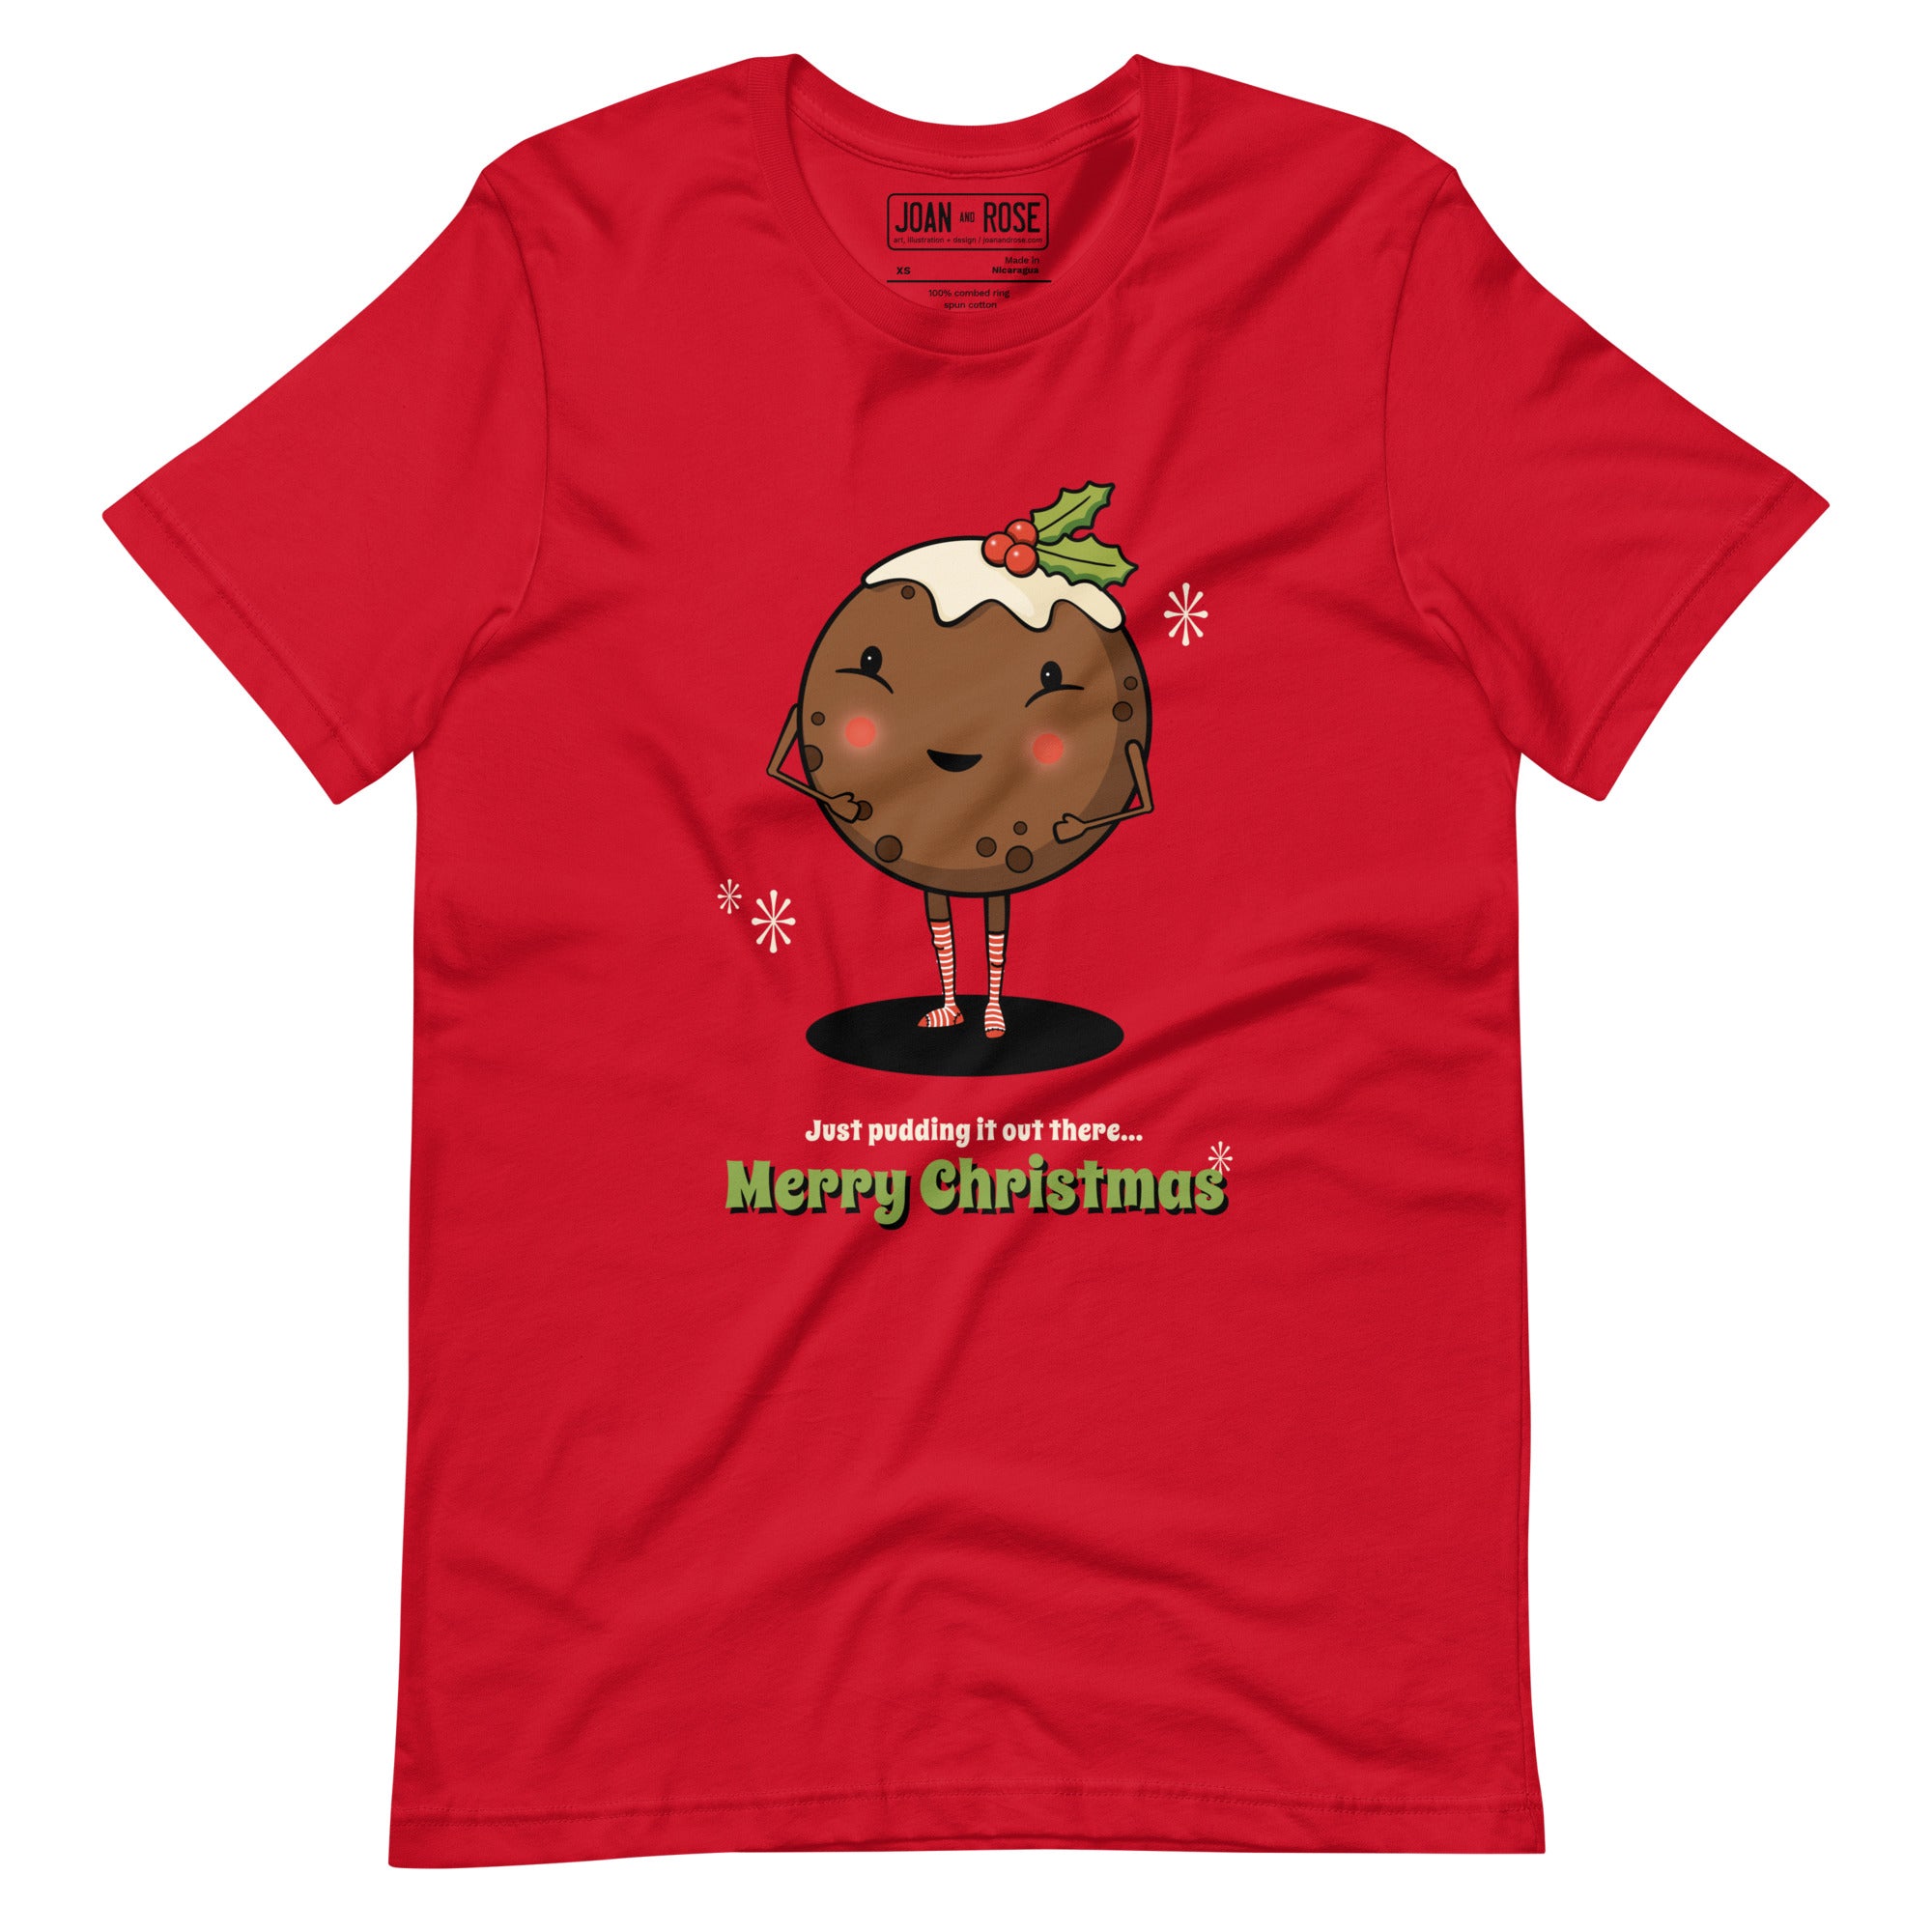 red t-shirt with a cute christmas pudding character with a custard and holly hat wearing red and white striped socks smiling with the text Just Pudding it out there, Merry Christmas